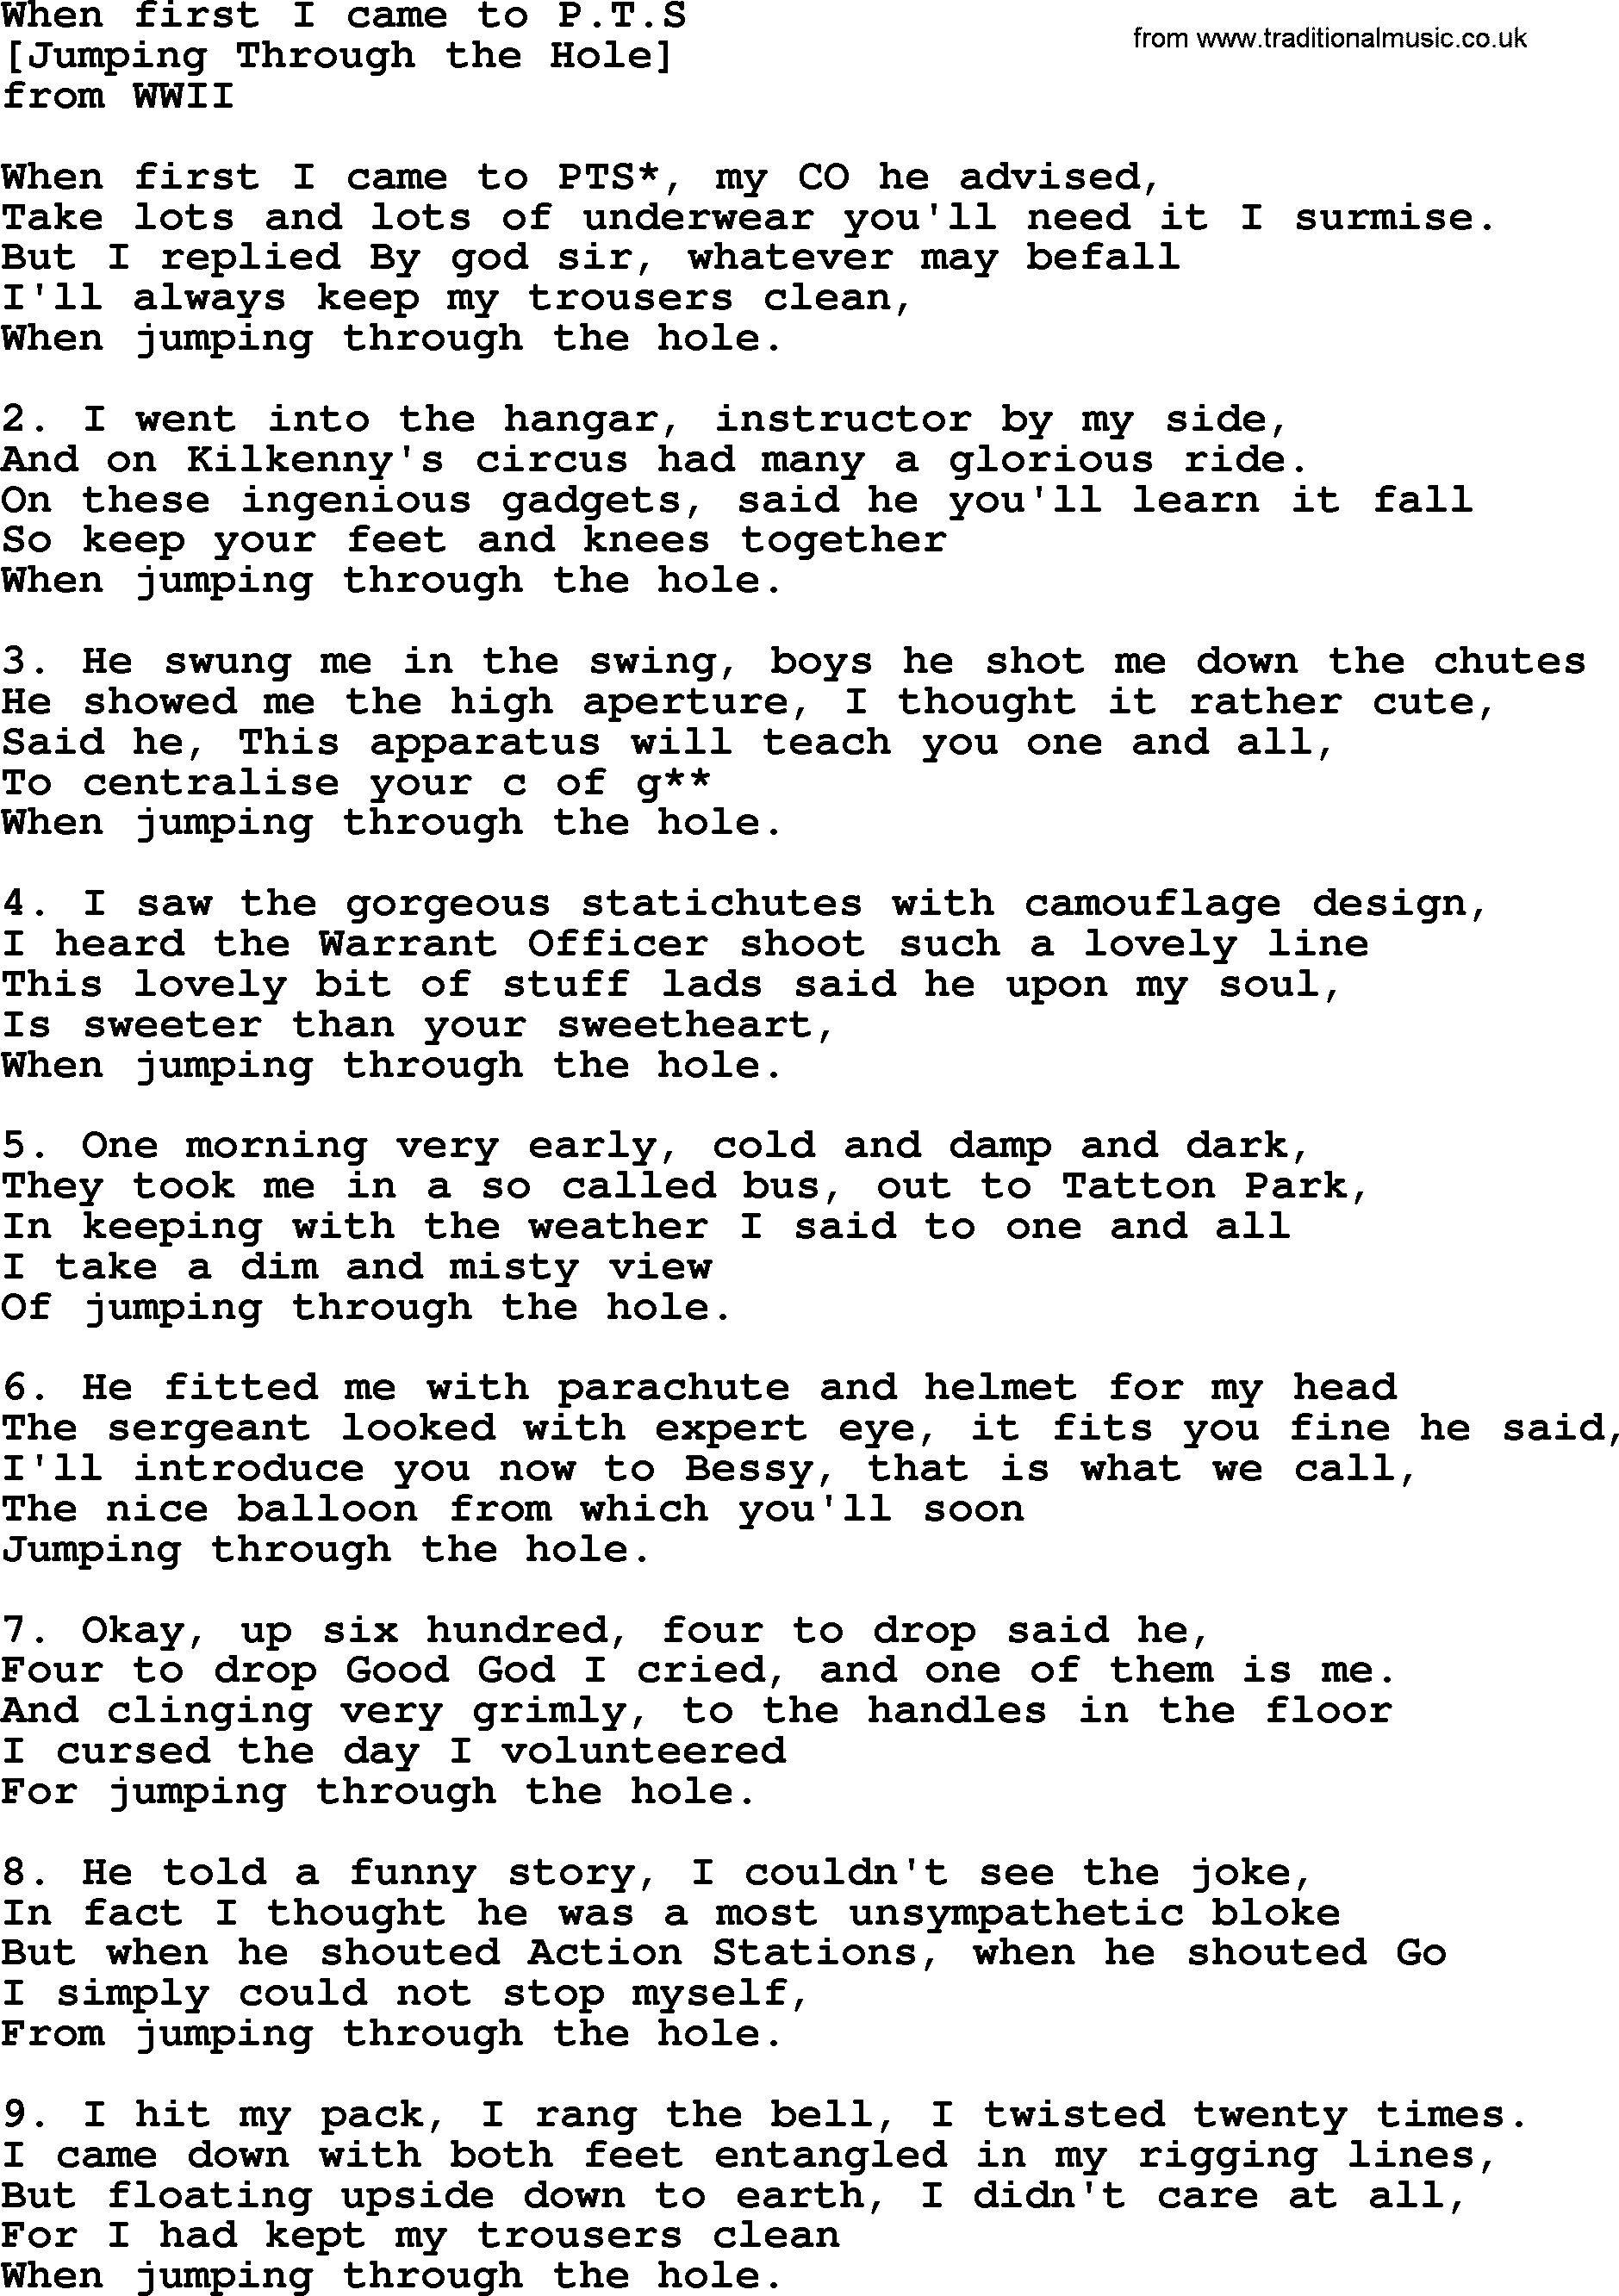 Old English Song Lyrics for When First I Came To , with PDF